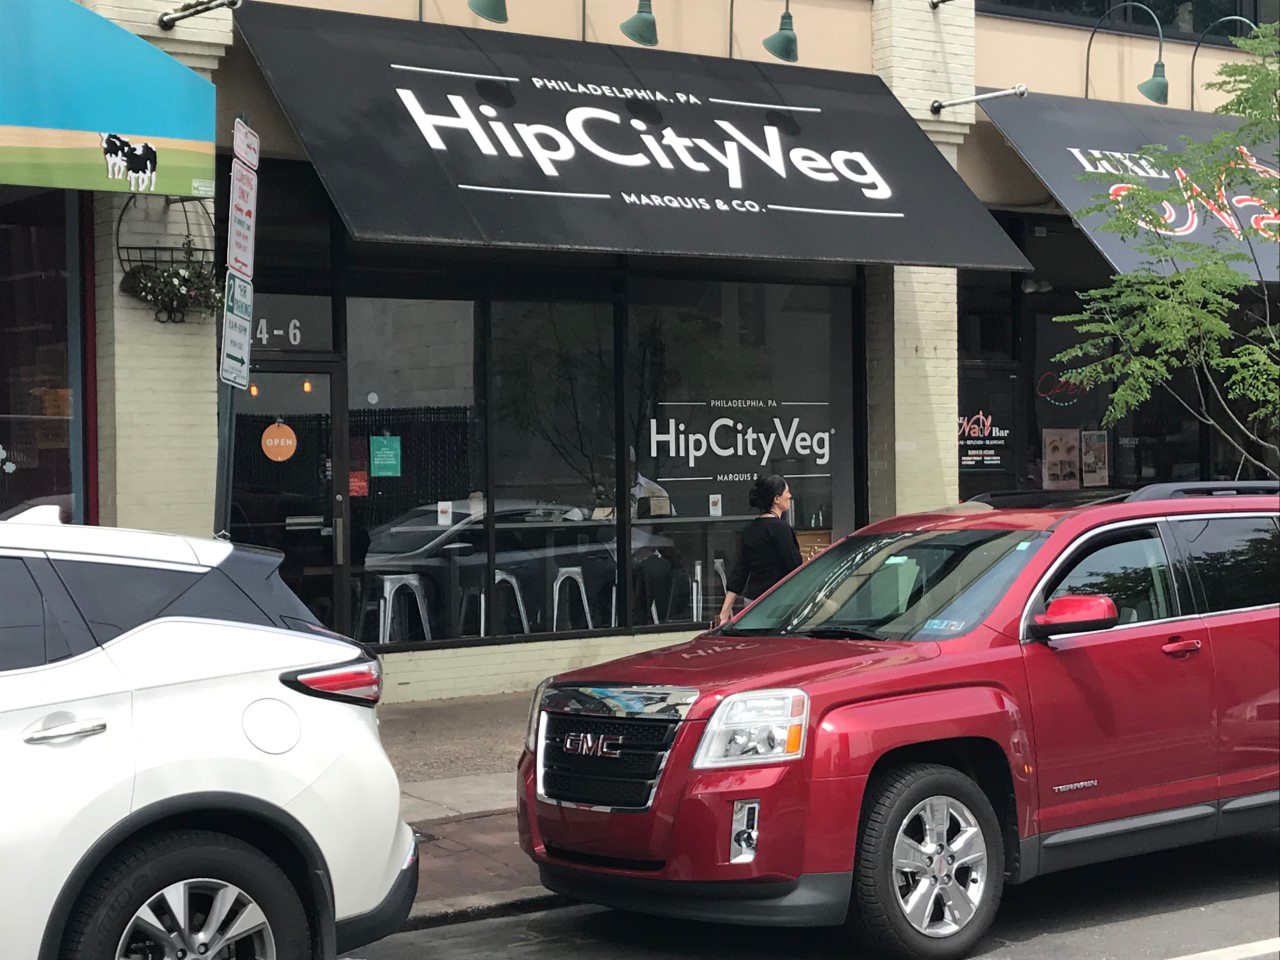 View of facade and awning for HipCityVeg on 40th St in daylight.